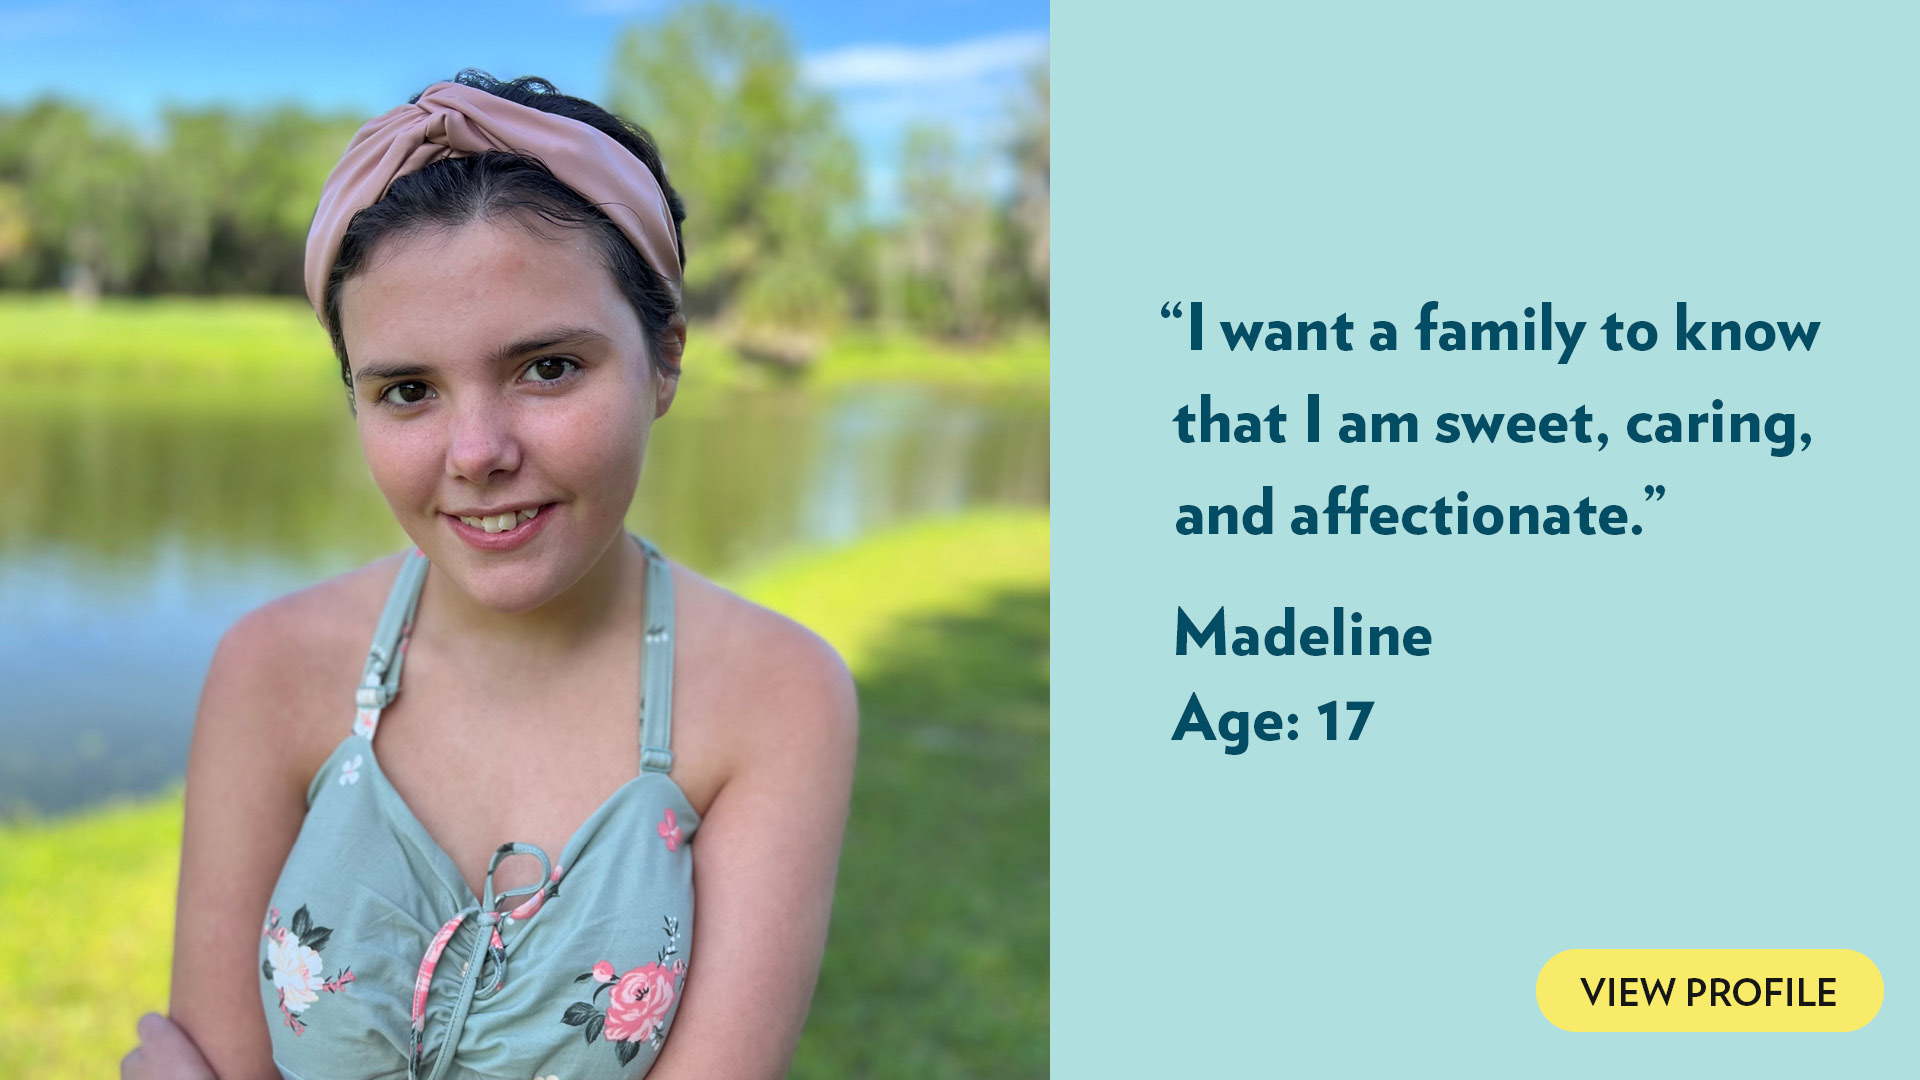 I want a family to know that I am sweet, caring, and affectionate. Madeline, age 17. View profile.